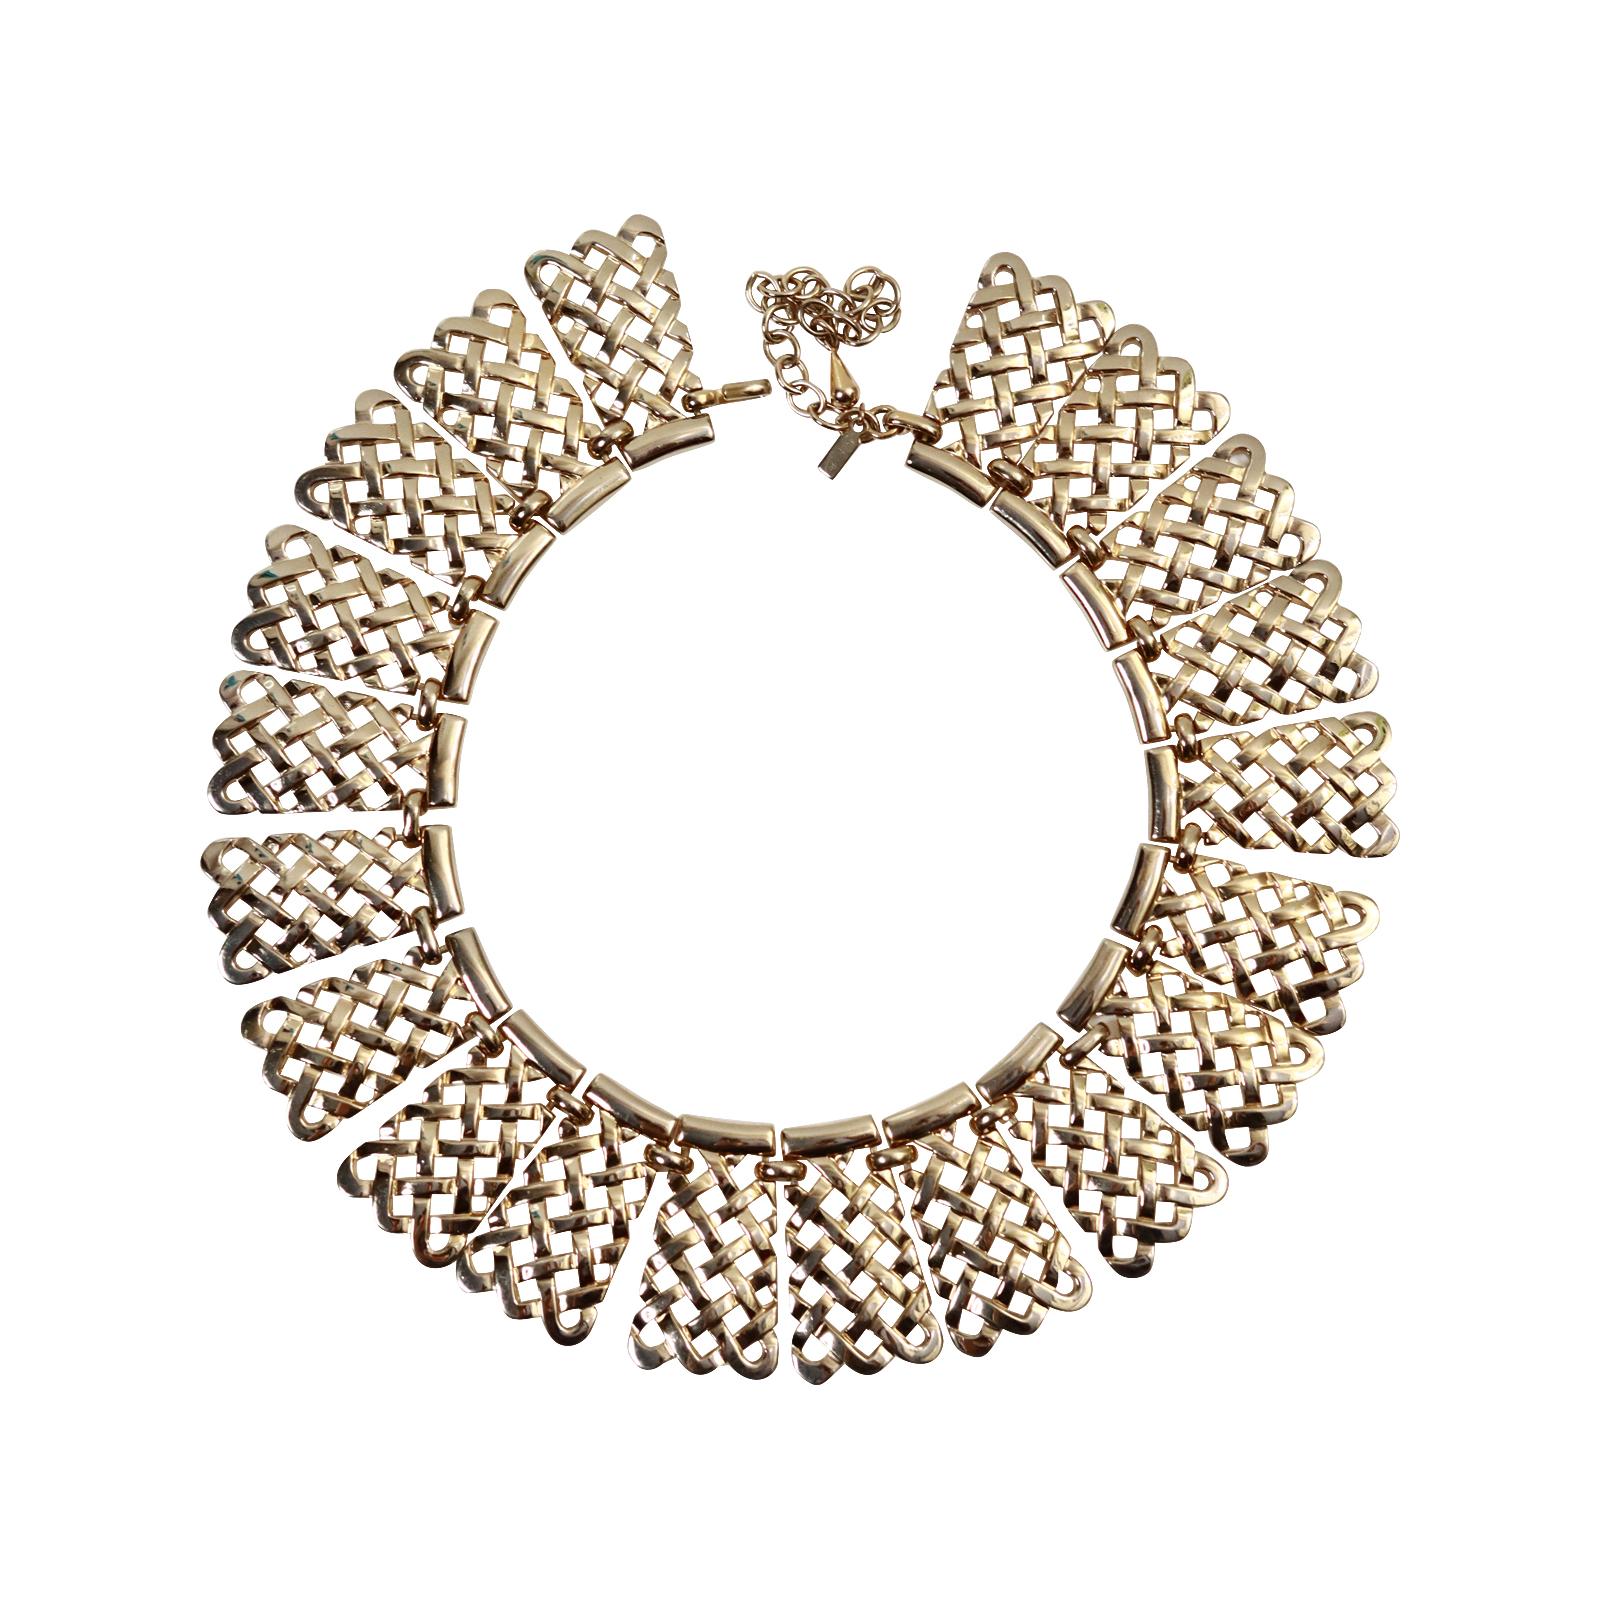 Vintage Monet Lattice Collar Necklace Circa 1980s In Good Condition For Sale In New York, NY